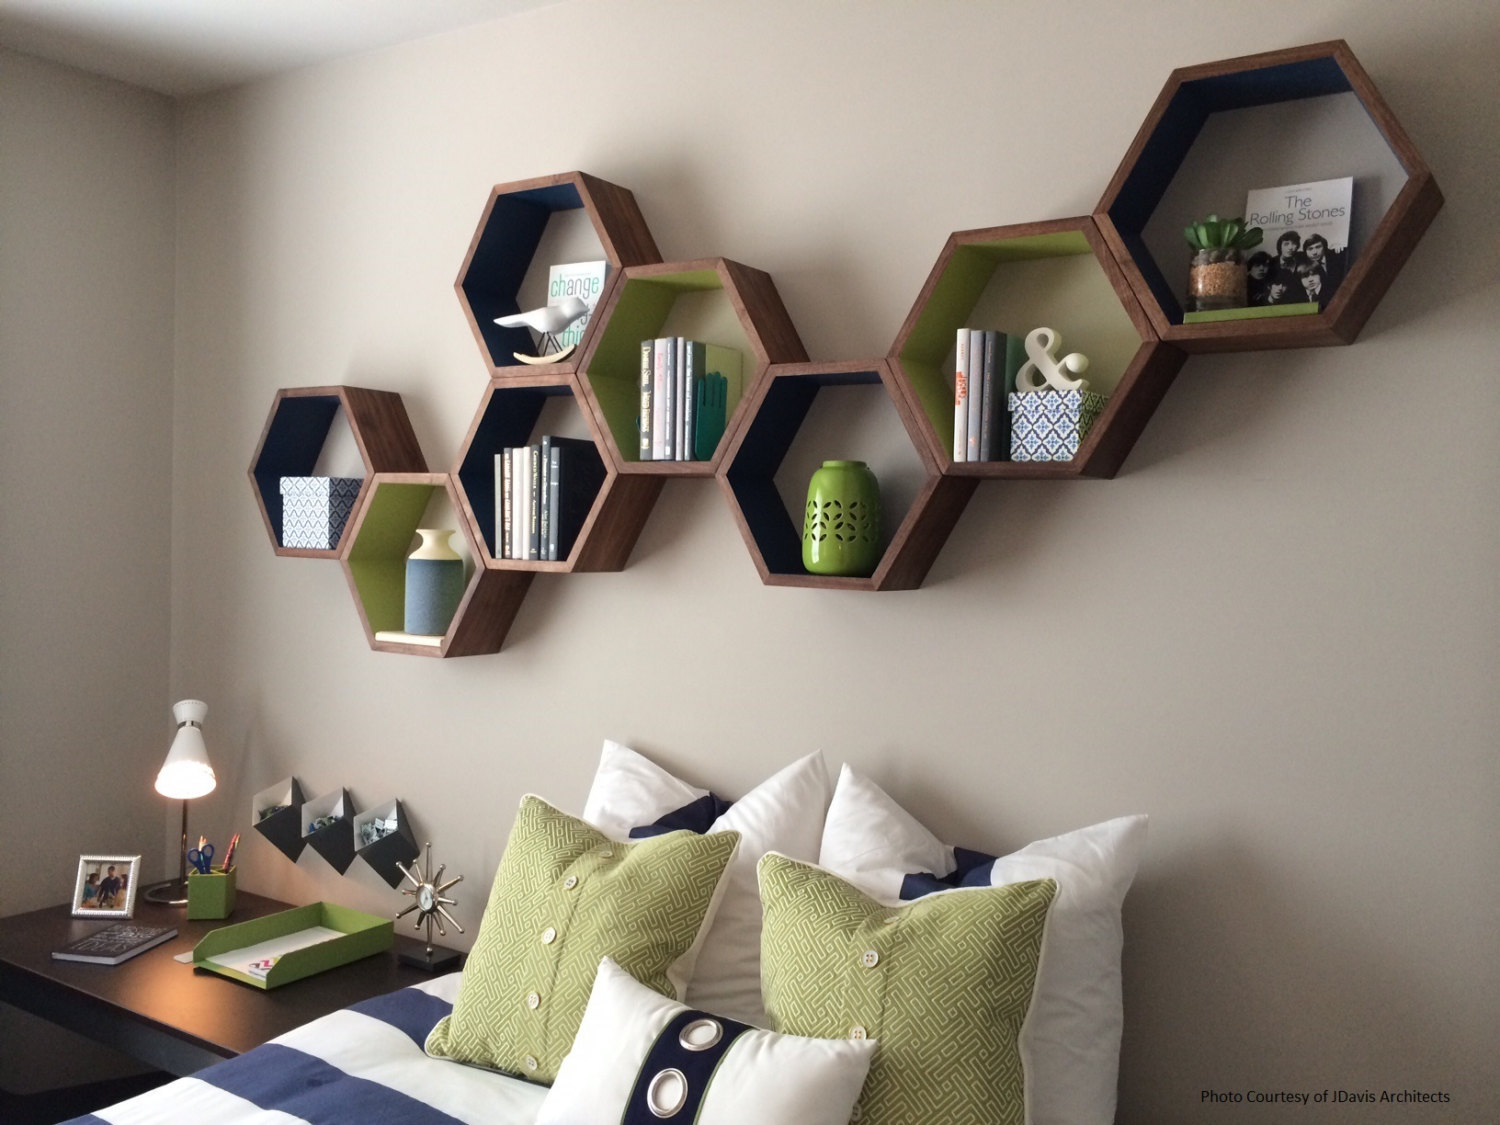 20 Creative Ways To Decorate Your Home With Unexpected ...